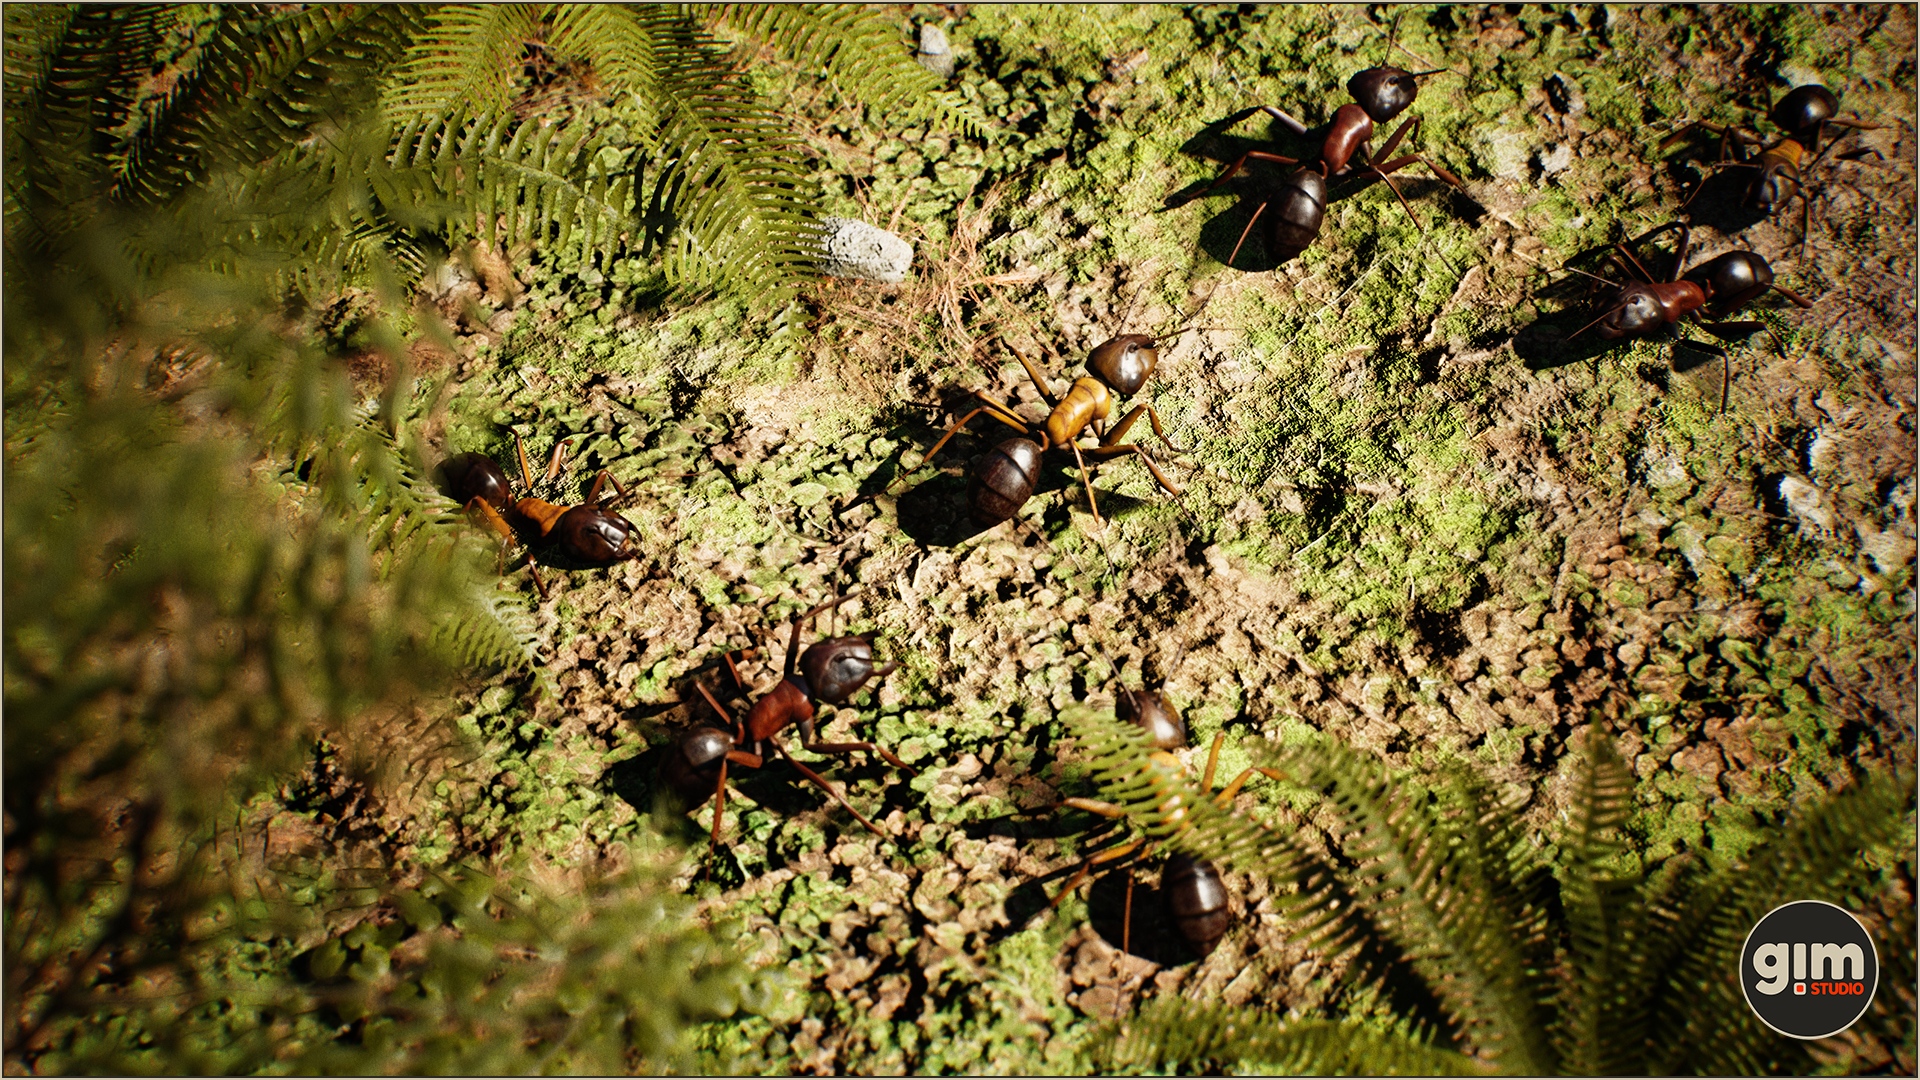 Bunch of ants runing home